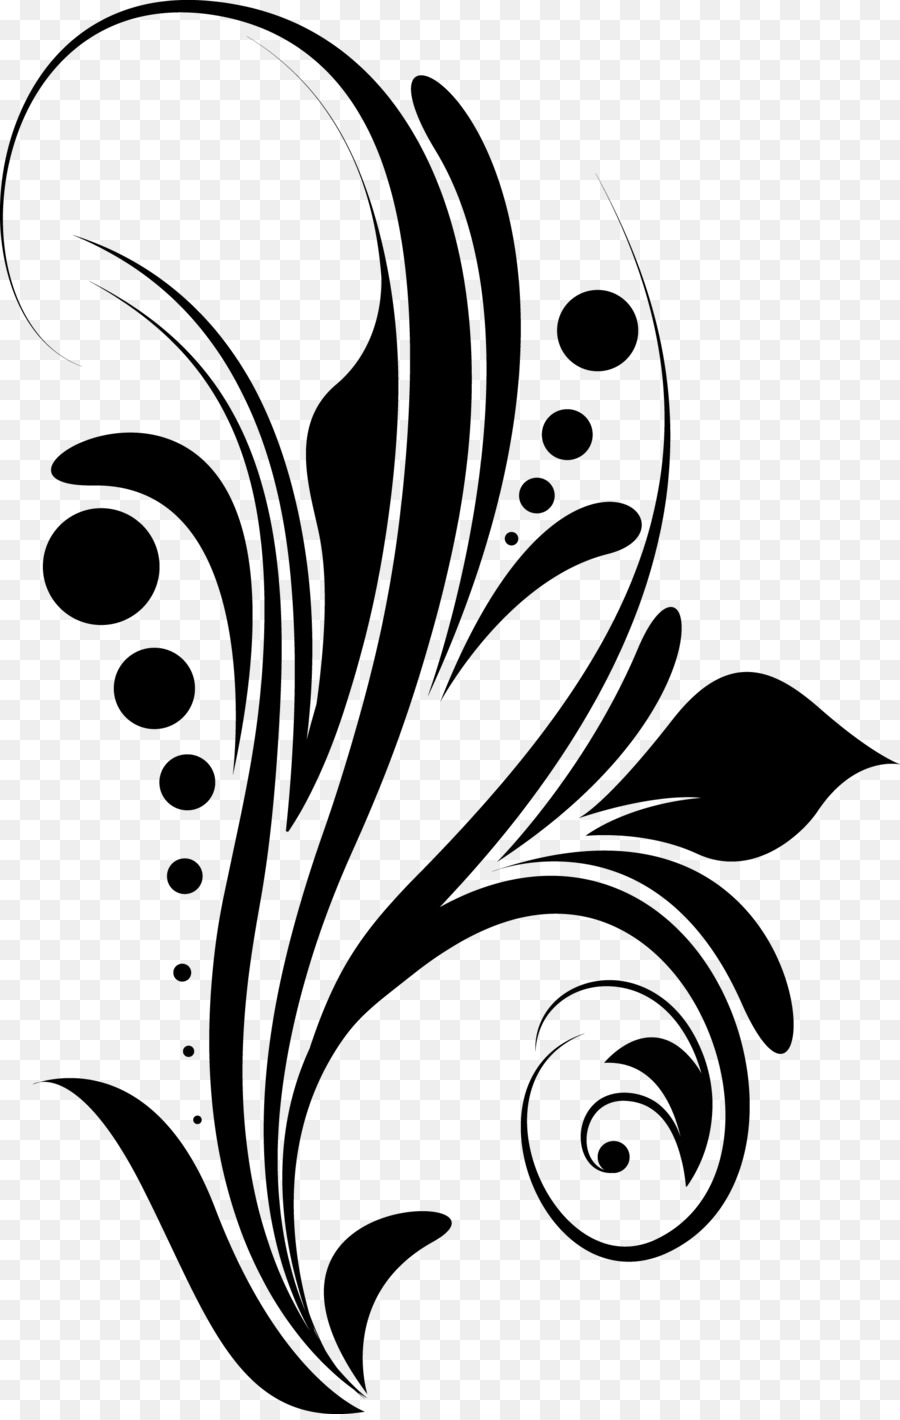 Flower Designs Black And White Png